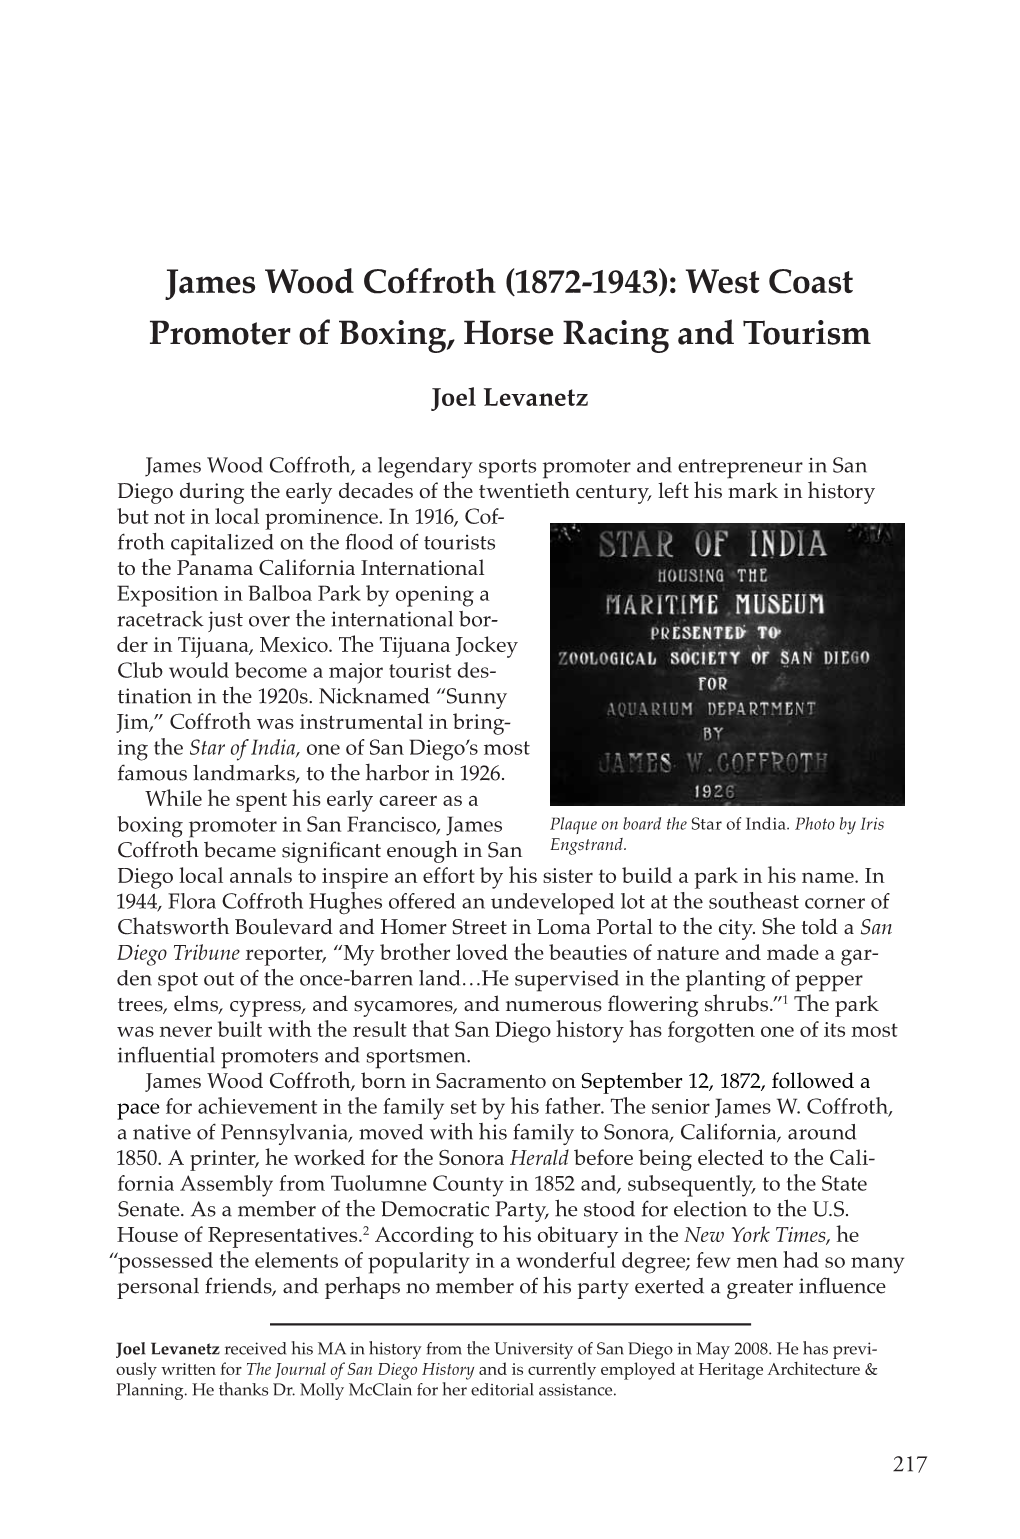 James Wood Coffroth (1872-1943): West Coast Promoter of Boxing, Horse Racing and Tourism